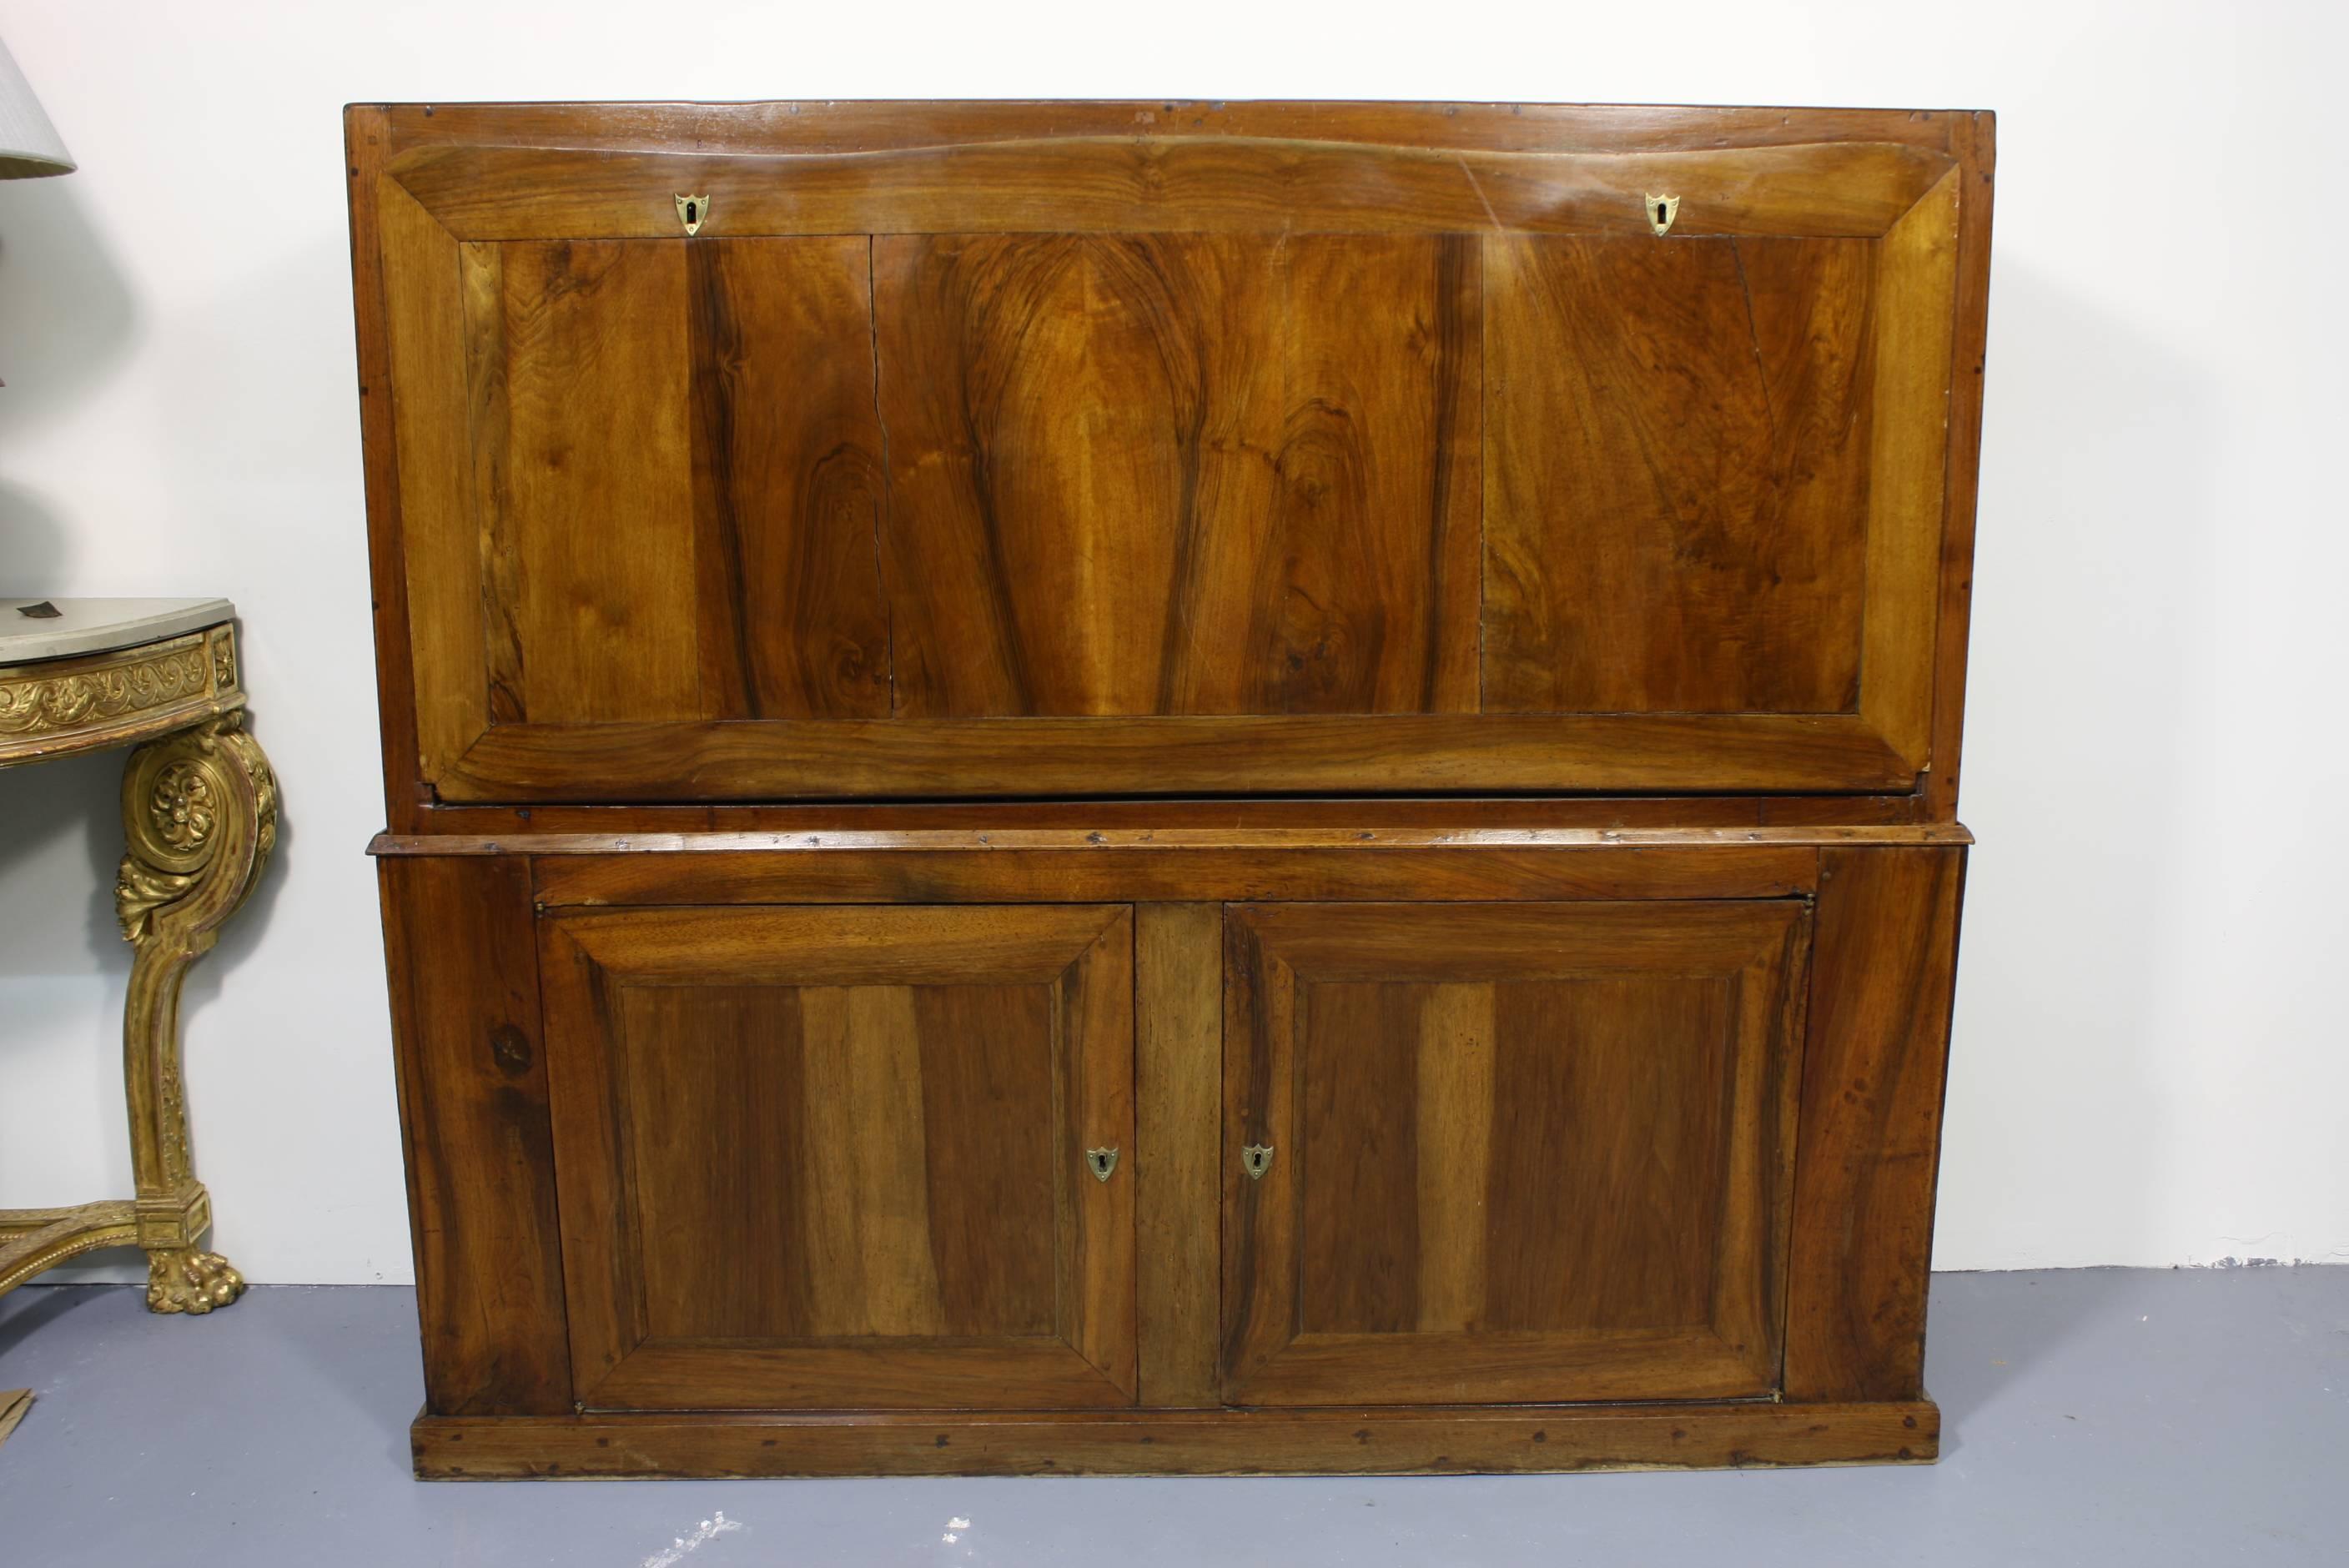 This French Directoire traveling secretary is made of walnut. Its large size is unusual and would make an impressive statement in a study. The top section of the secretary is period, dating from the end of the 18th century, while the base was